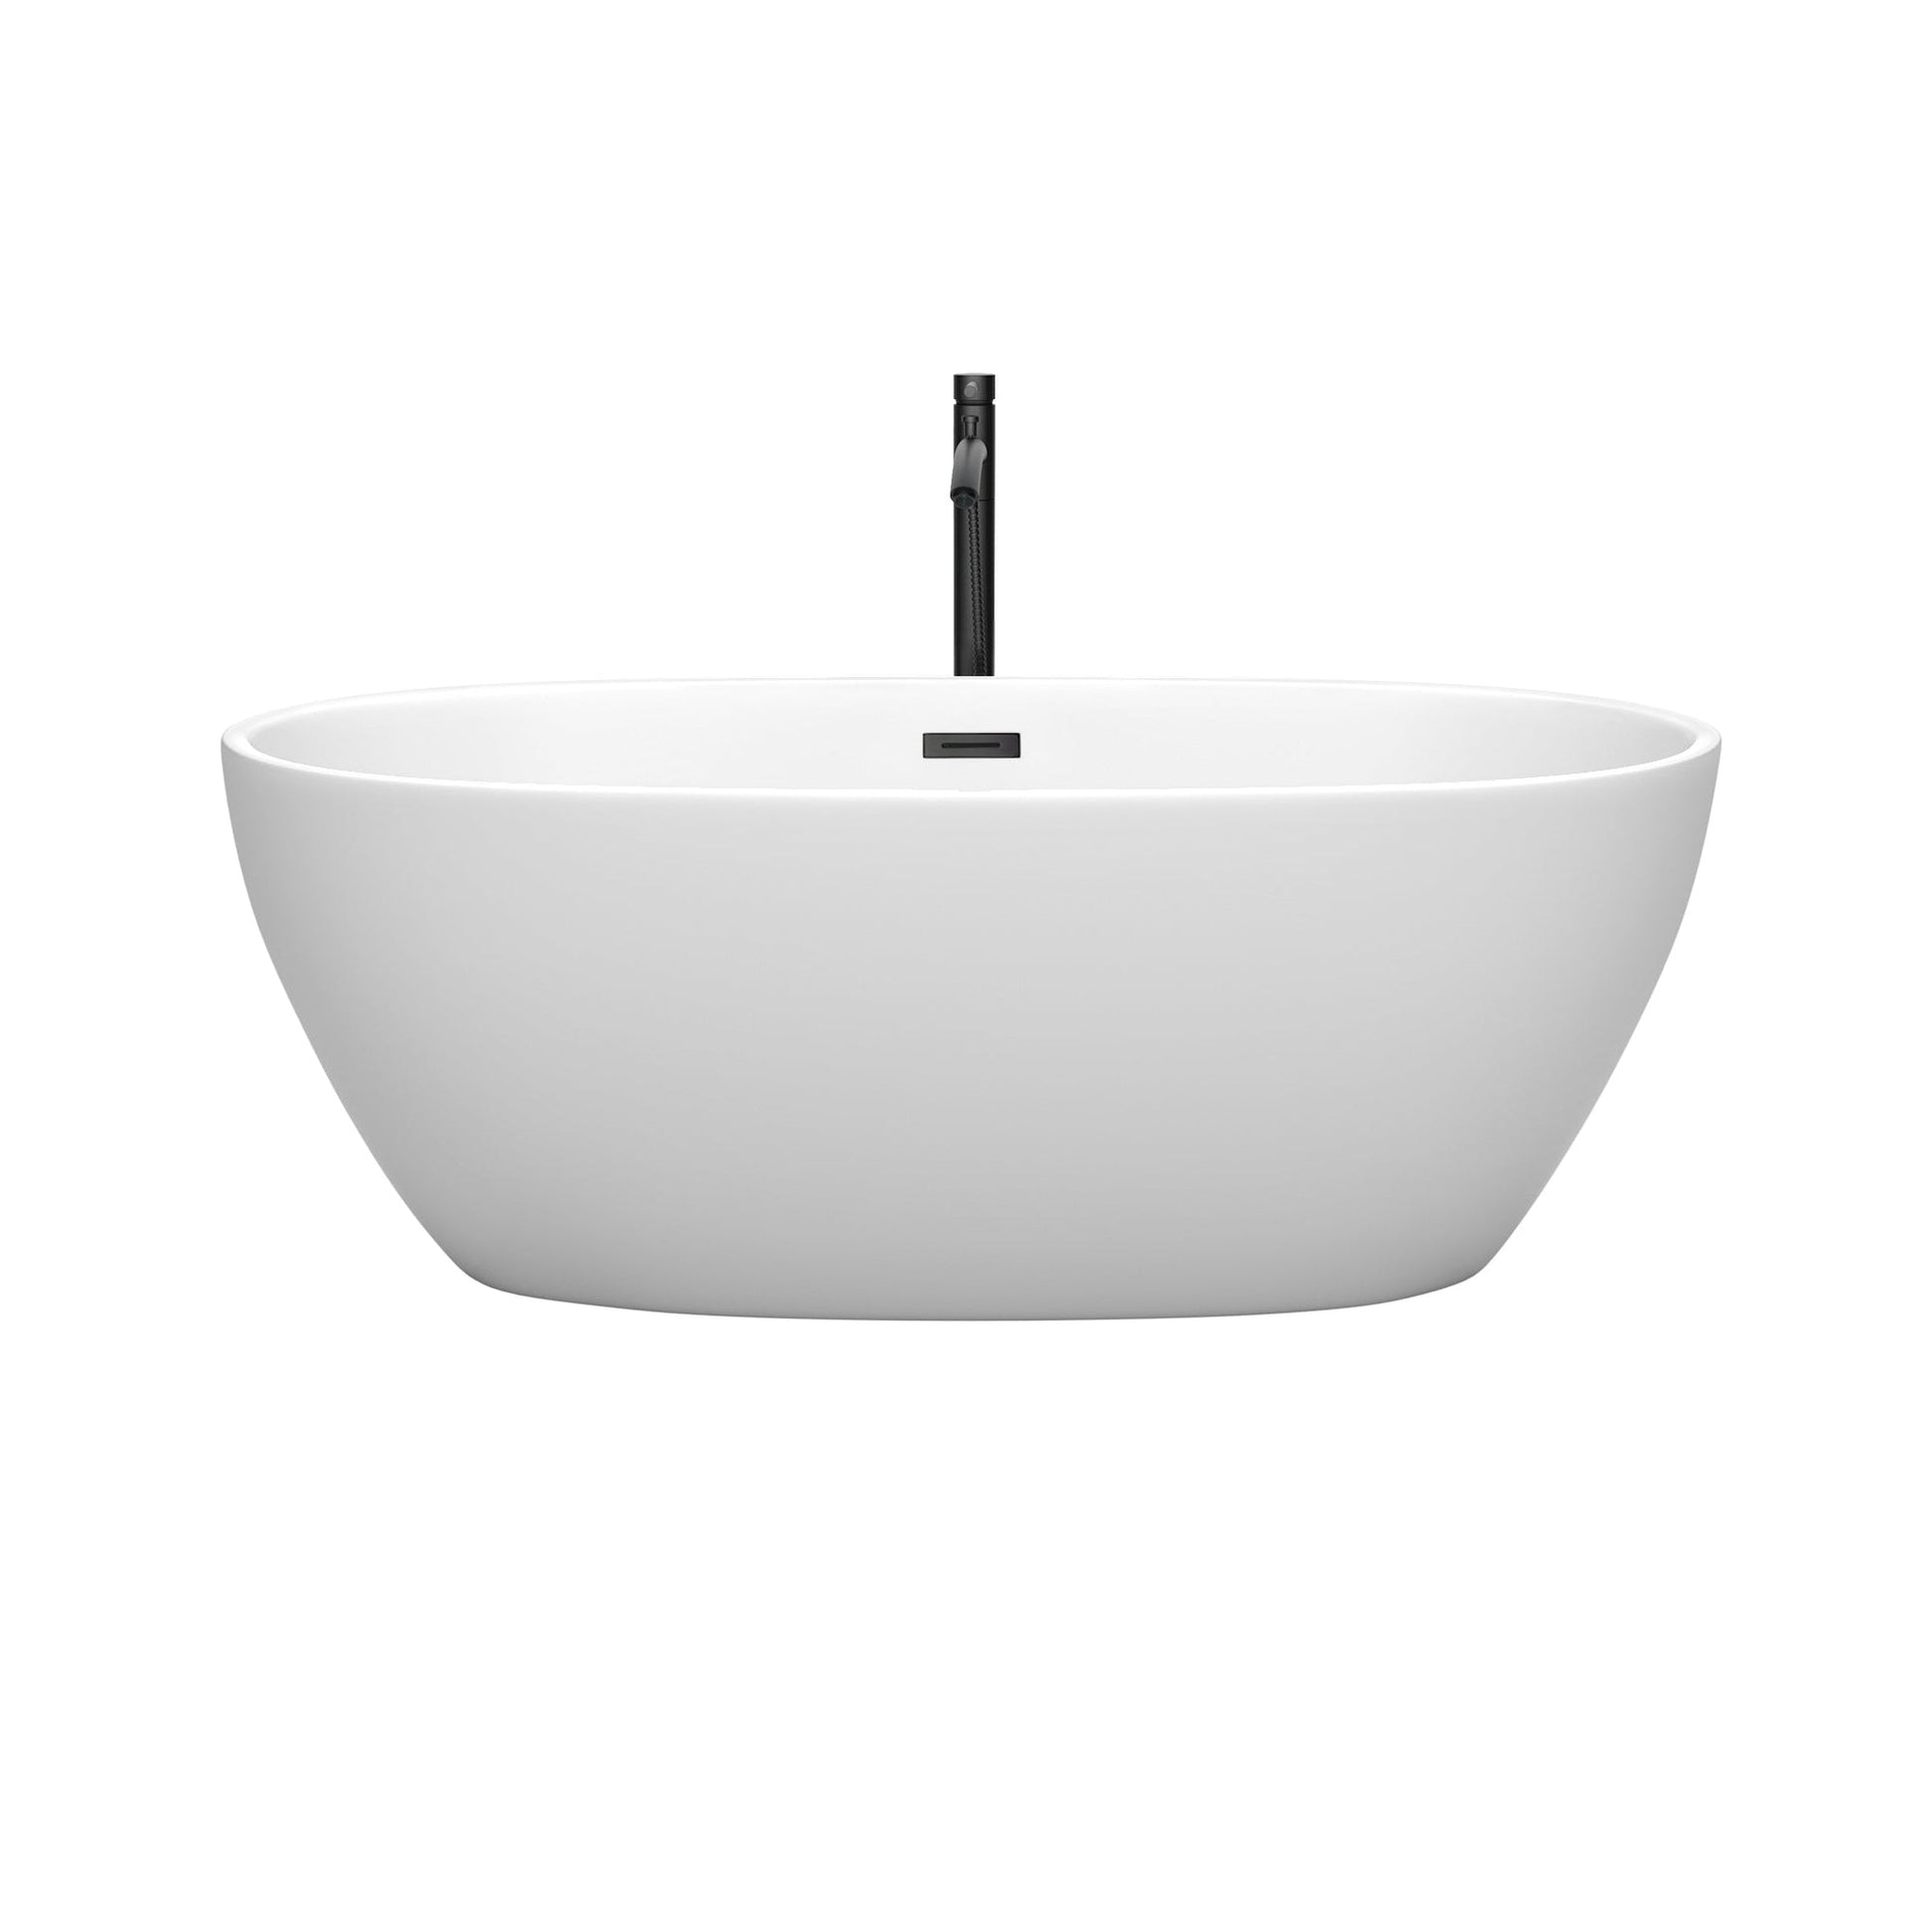 Wyndham Collection Juno 63" Freestanding Bathtub in Matte White With Floor Mounted Faucet, Drain and Overflow Trim in Matte Black